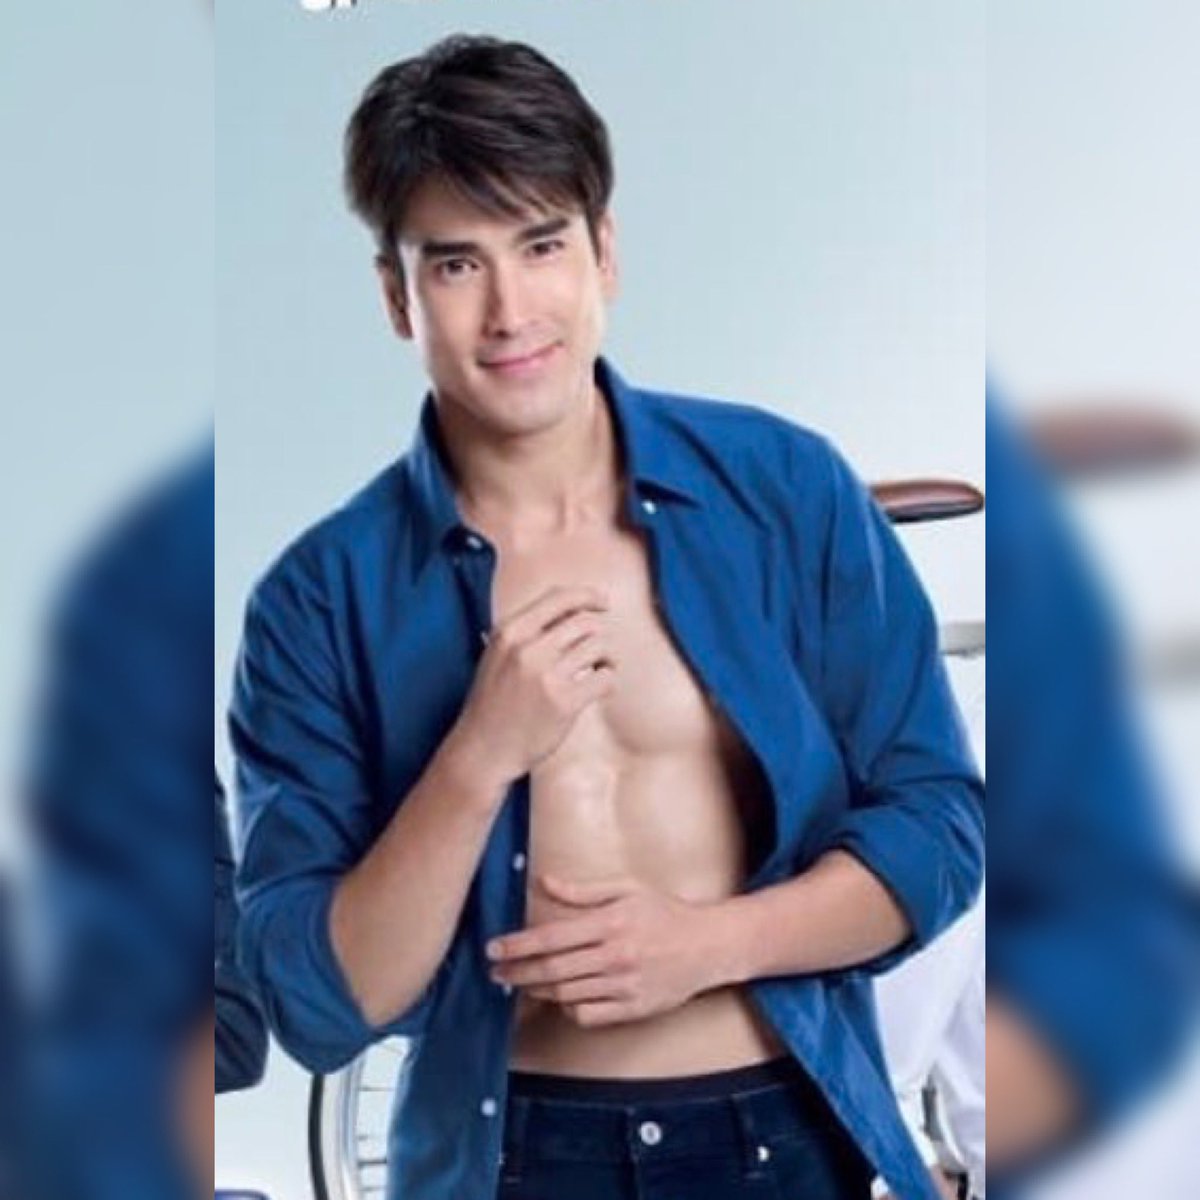 Hi guys! Please don’t forget to vote for Nadech Kugimiya.  #100SexiestMenInTheWorld2020Please LIKE and COMMENT. Can we make at least 10 comments a day? PLEASEEEE! THANK YOU SO MUCH! #ณเดชน์คูกิมิยะ  #ณเดชน์  #nadech LINKS: http://instagram.com/p/CDYF0HrJnAS/  http://instagram.com/p/CDYF03pp3Tq/ 